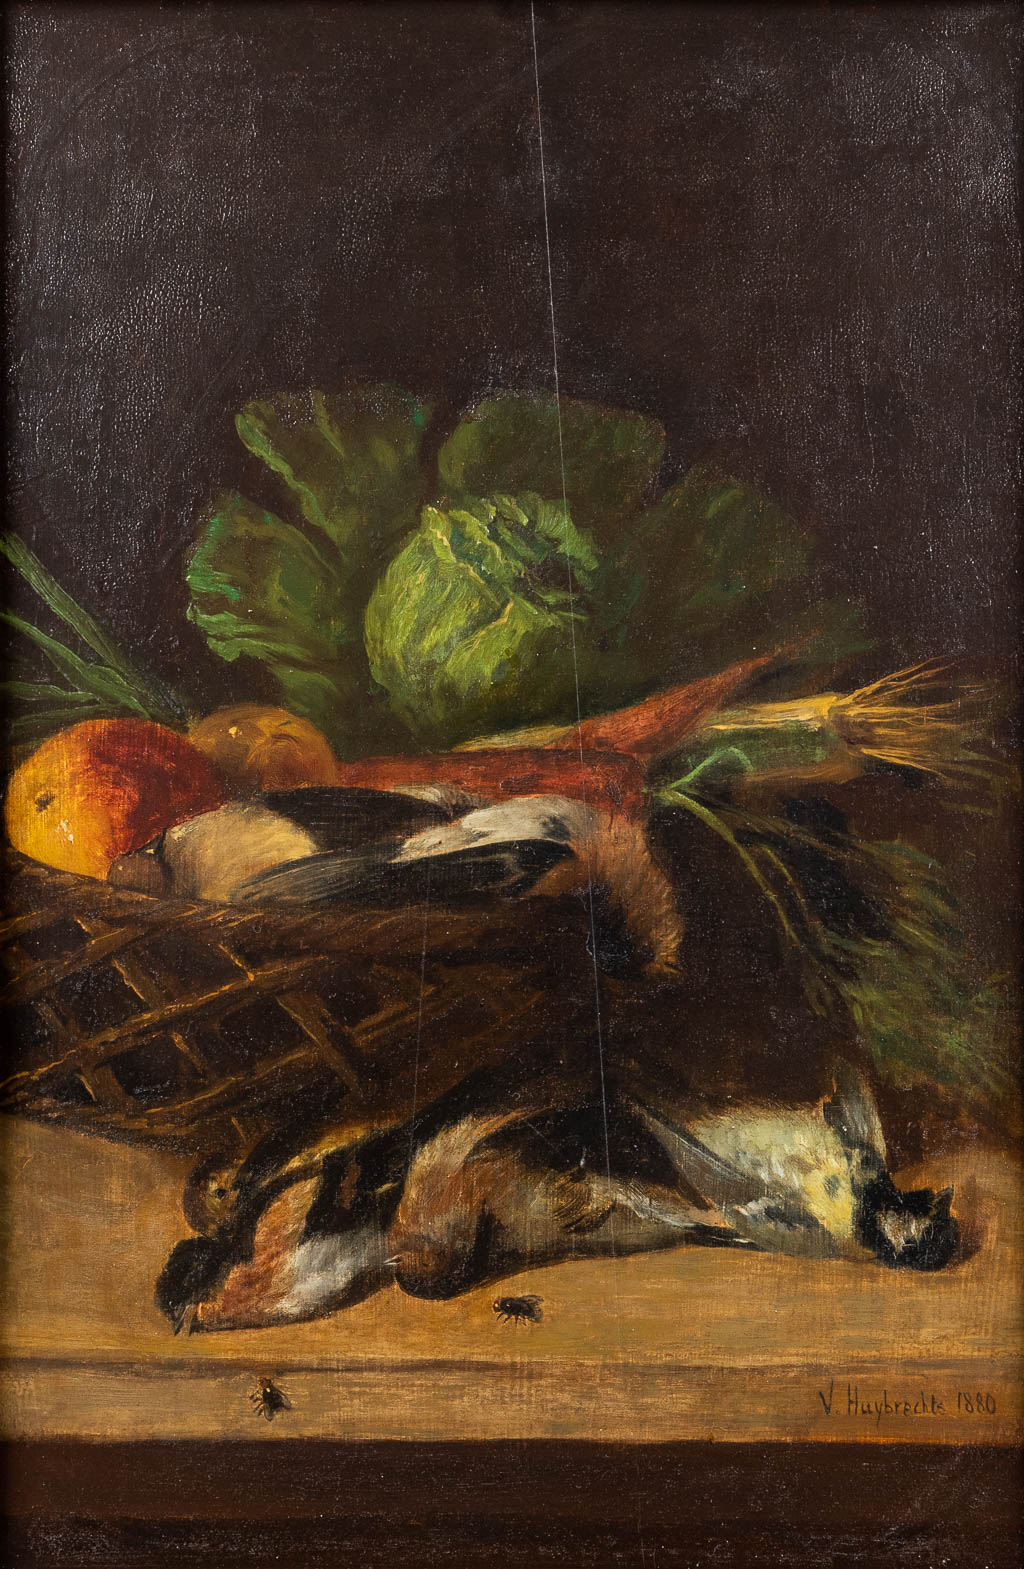 V. HUYBRECHTS (XIX-XX) 'Nature Morte with small birds' oil on panel. 1880. (W:36 x H:55,5 cm)